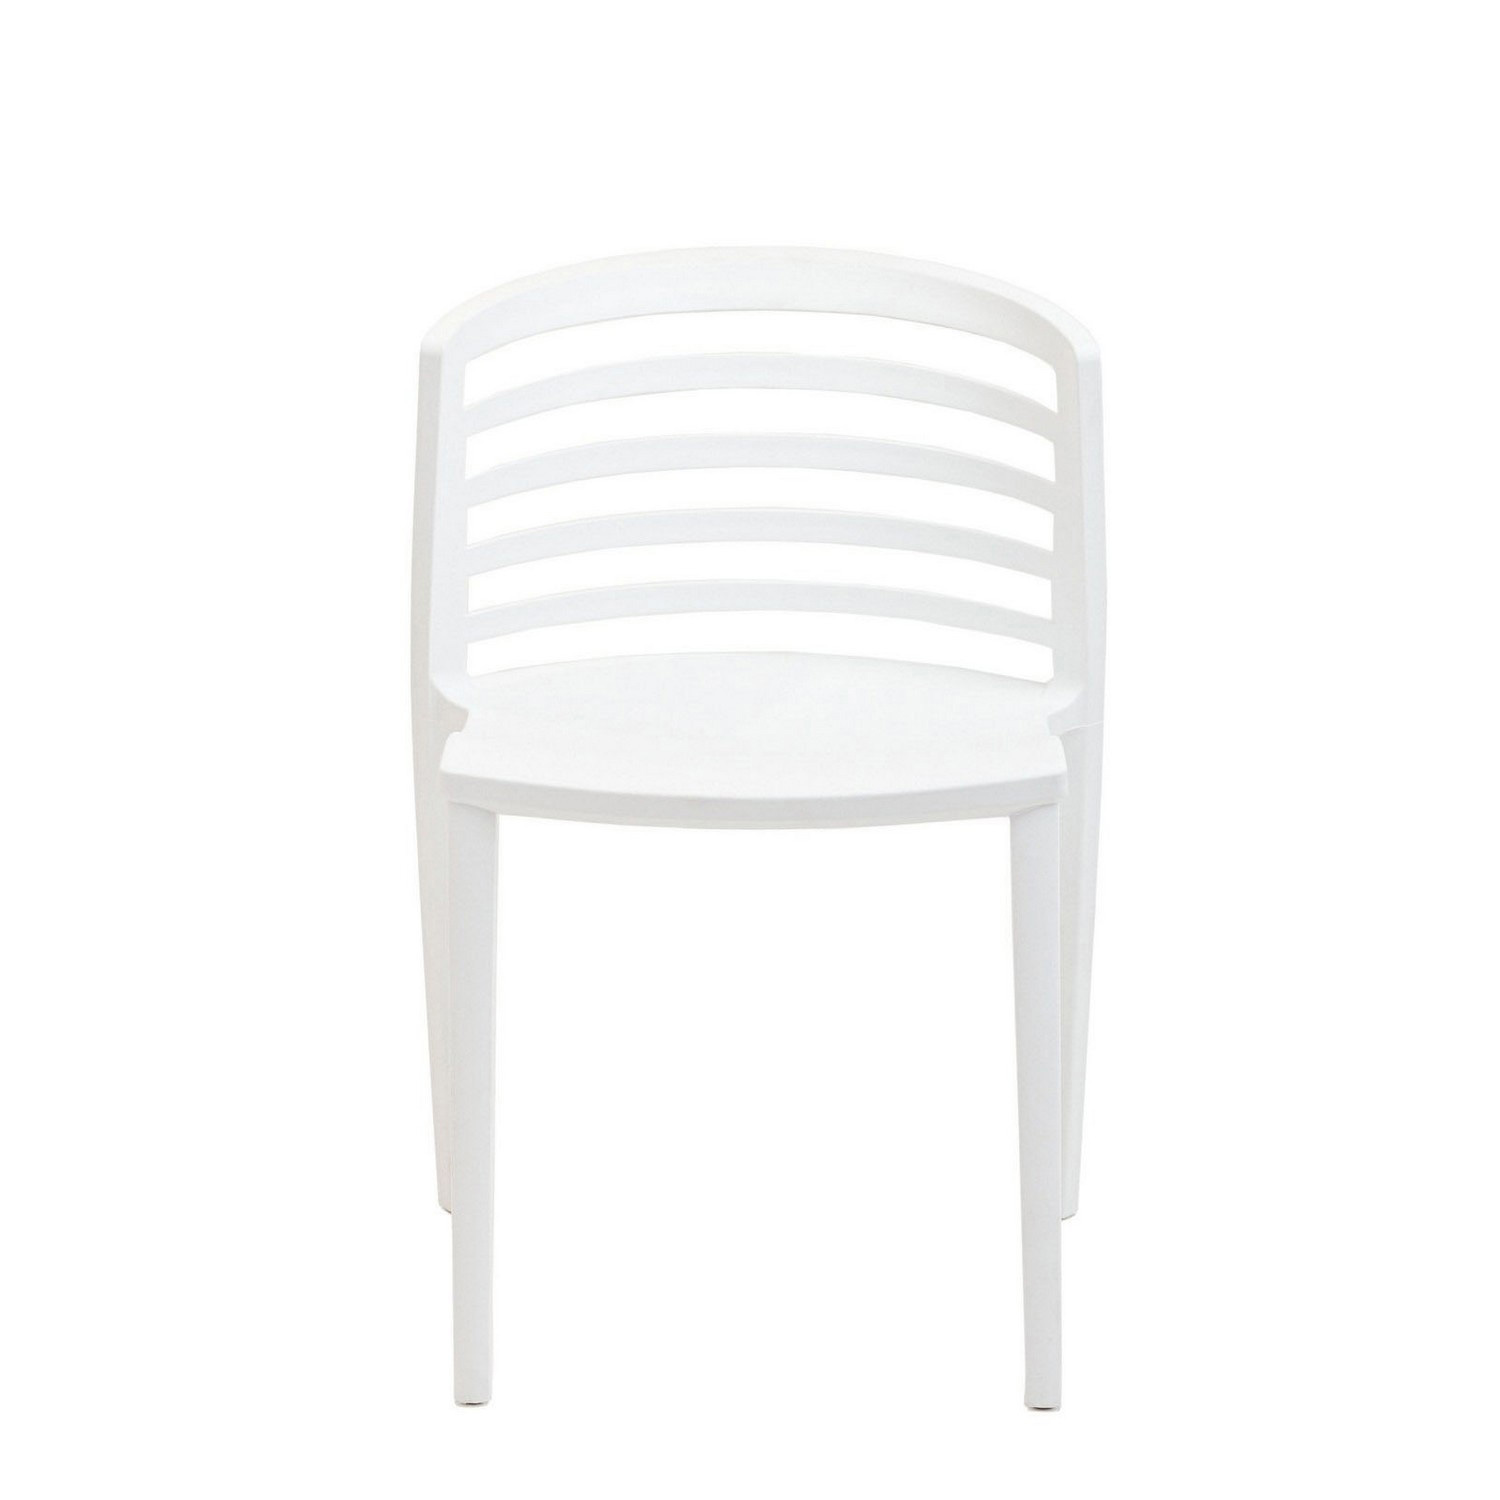 Modway Curvy Dining Chairs Set of 2 - White